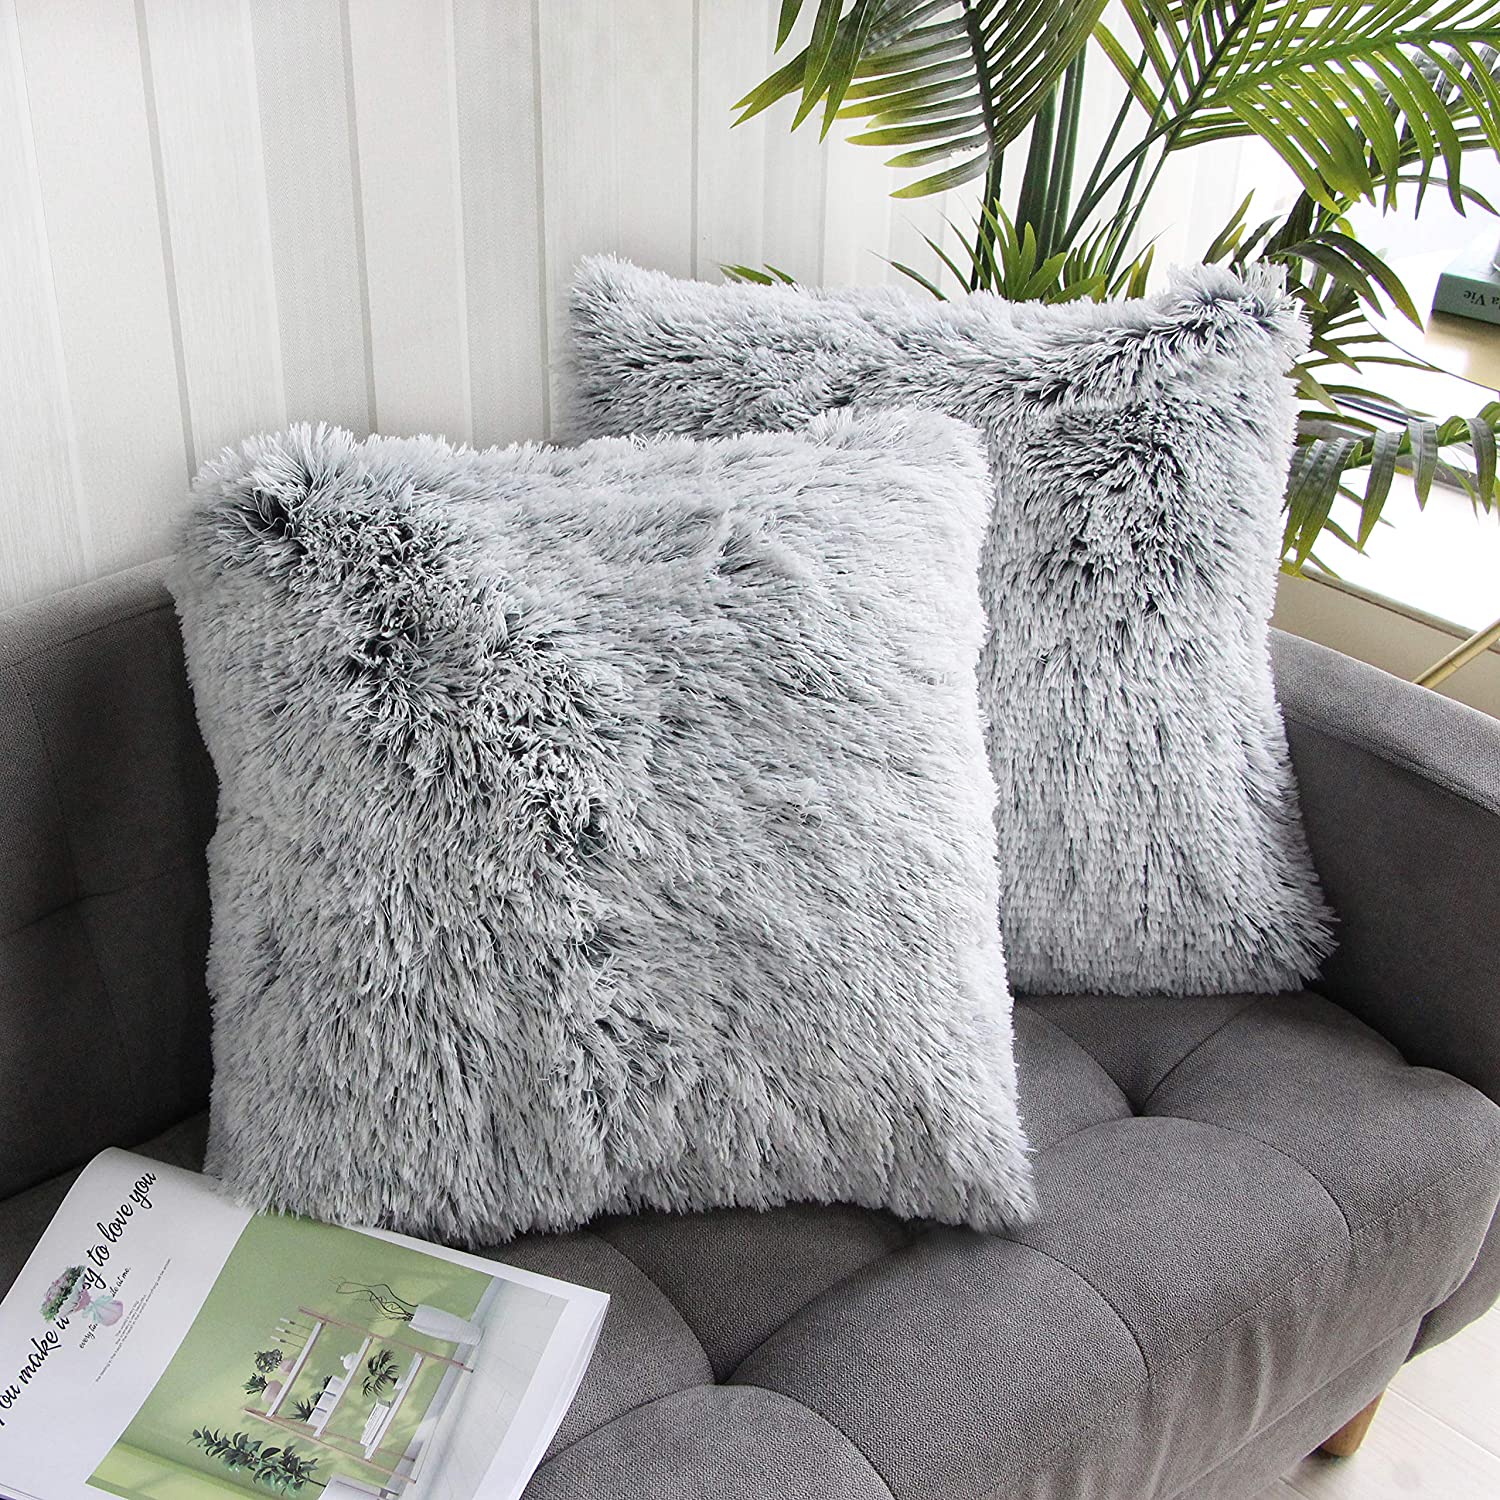 https://www.dontwasteyourmoney.com/wp-content/uploads/2021/07/uhomy-grey-ombre-throw-pillows-2-pack-grey-throw-pillows.jpg